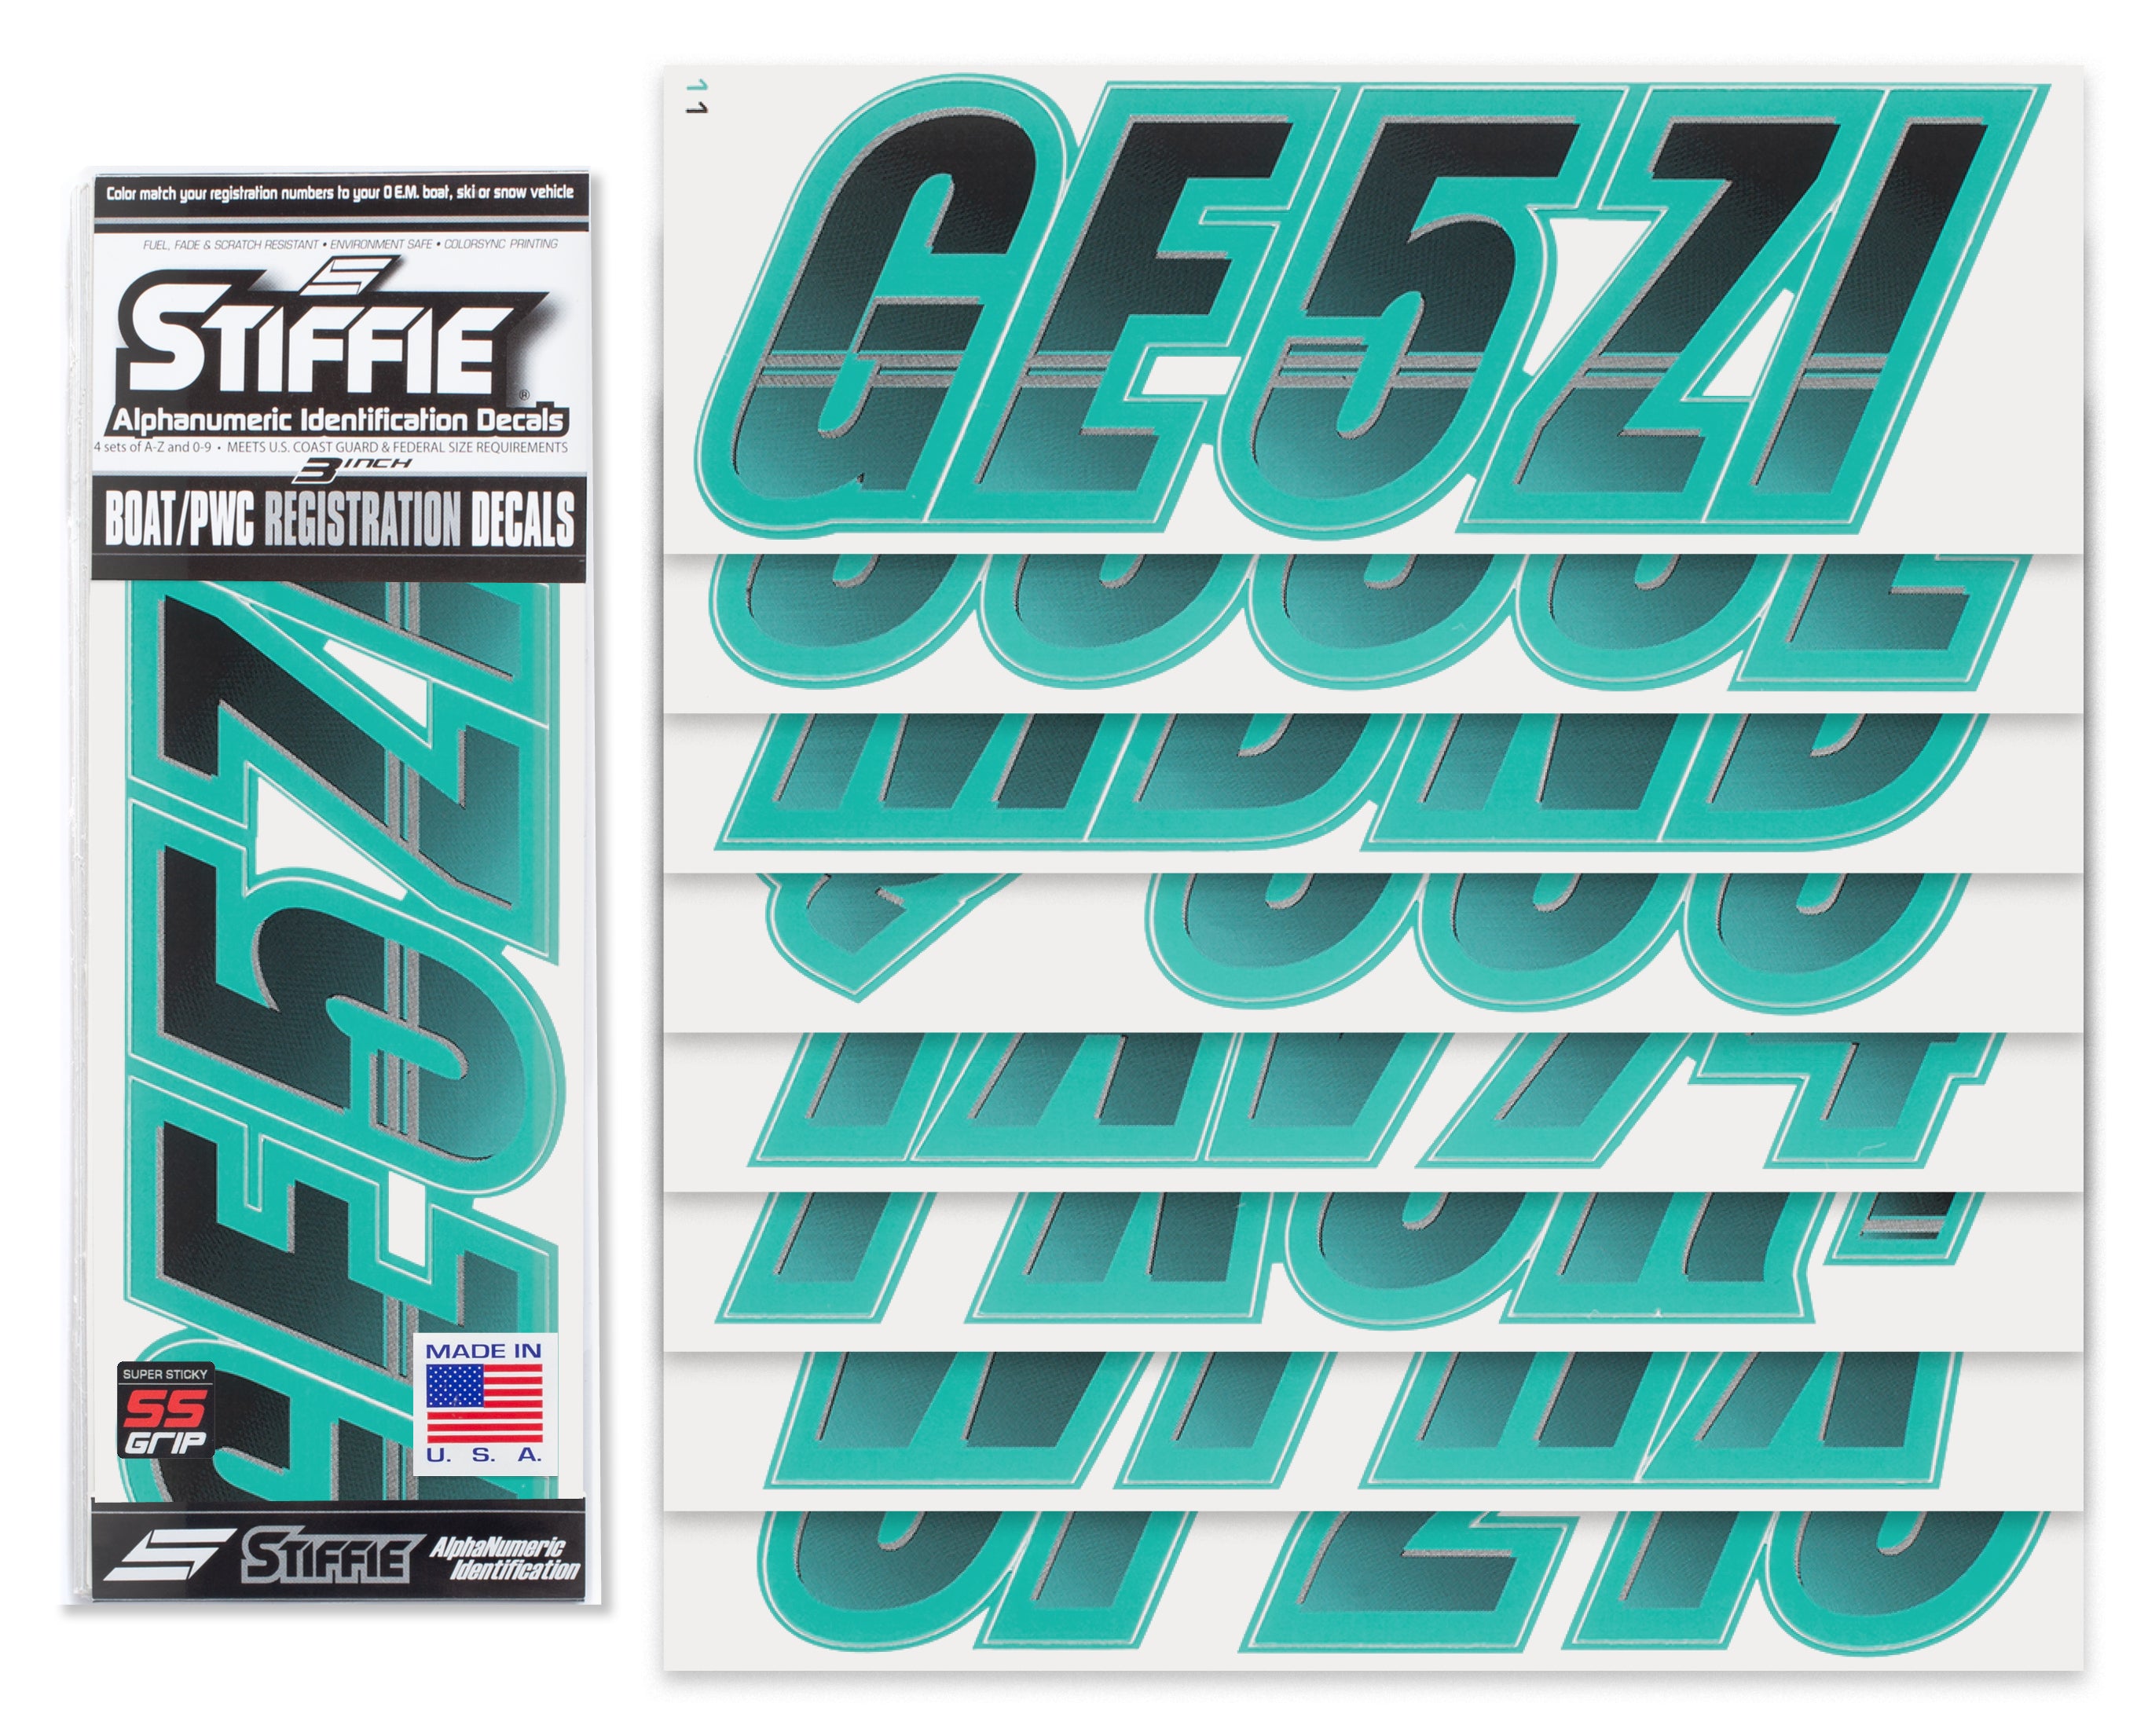 Stiffie Techtron Black/Candy Blue Super Sticky 3" Alpha Numeric Registration Identification Numbers Stickers Decals for Sea-Doo Spark, Inflatable Boats, Ribs, Hypalon/PVC, PWC and Boats.